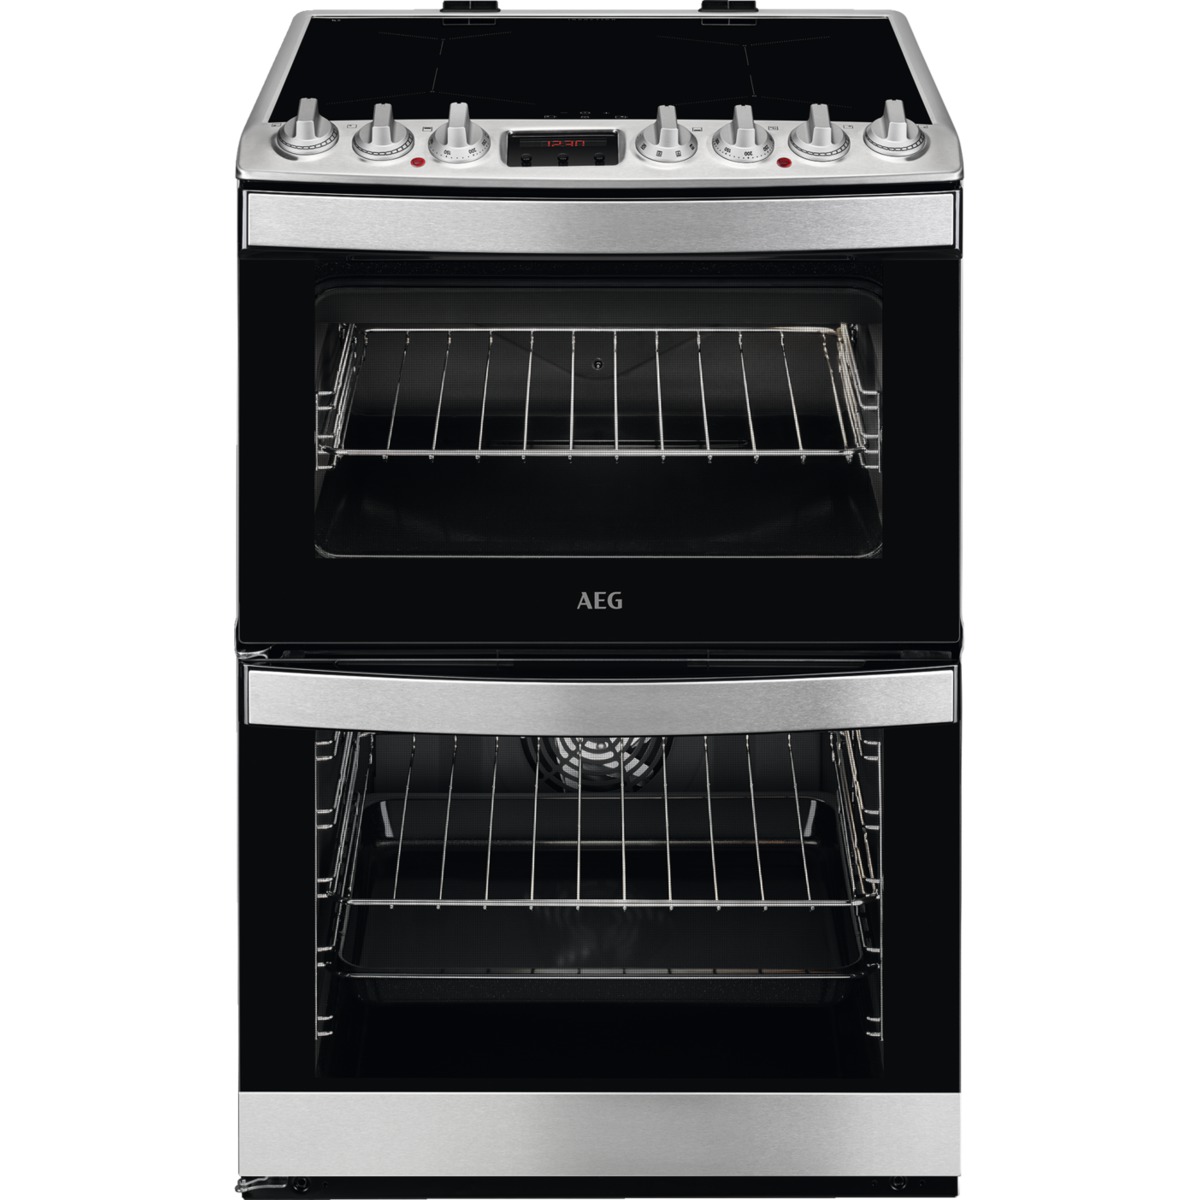 AEG 600mm Double Electric Oven Induction Hob S/Steel